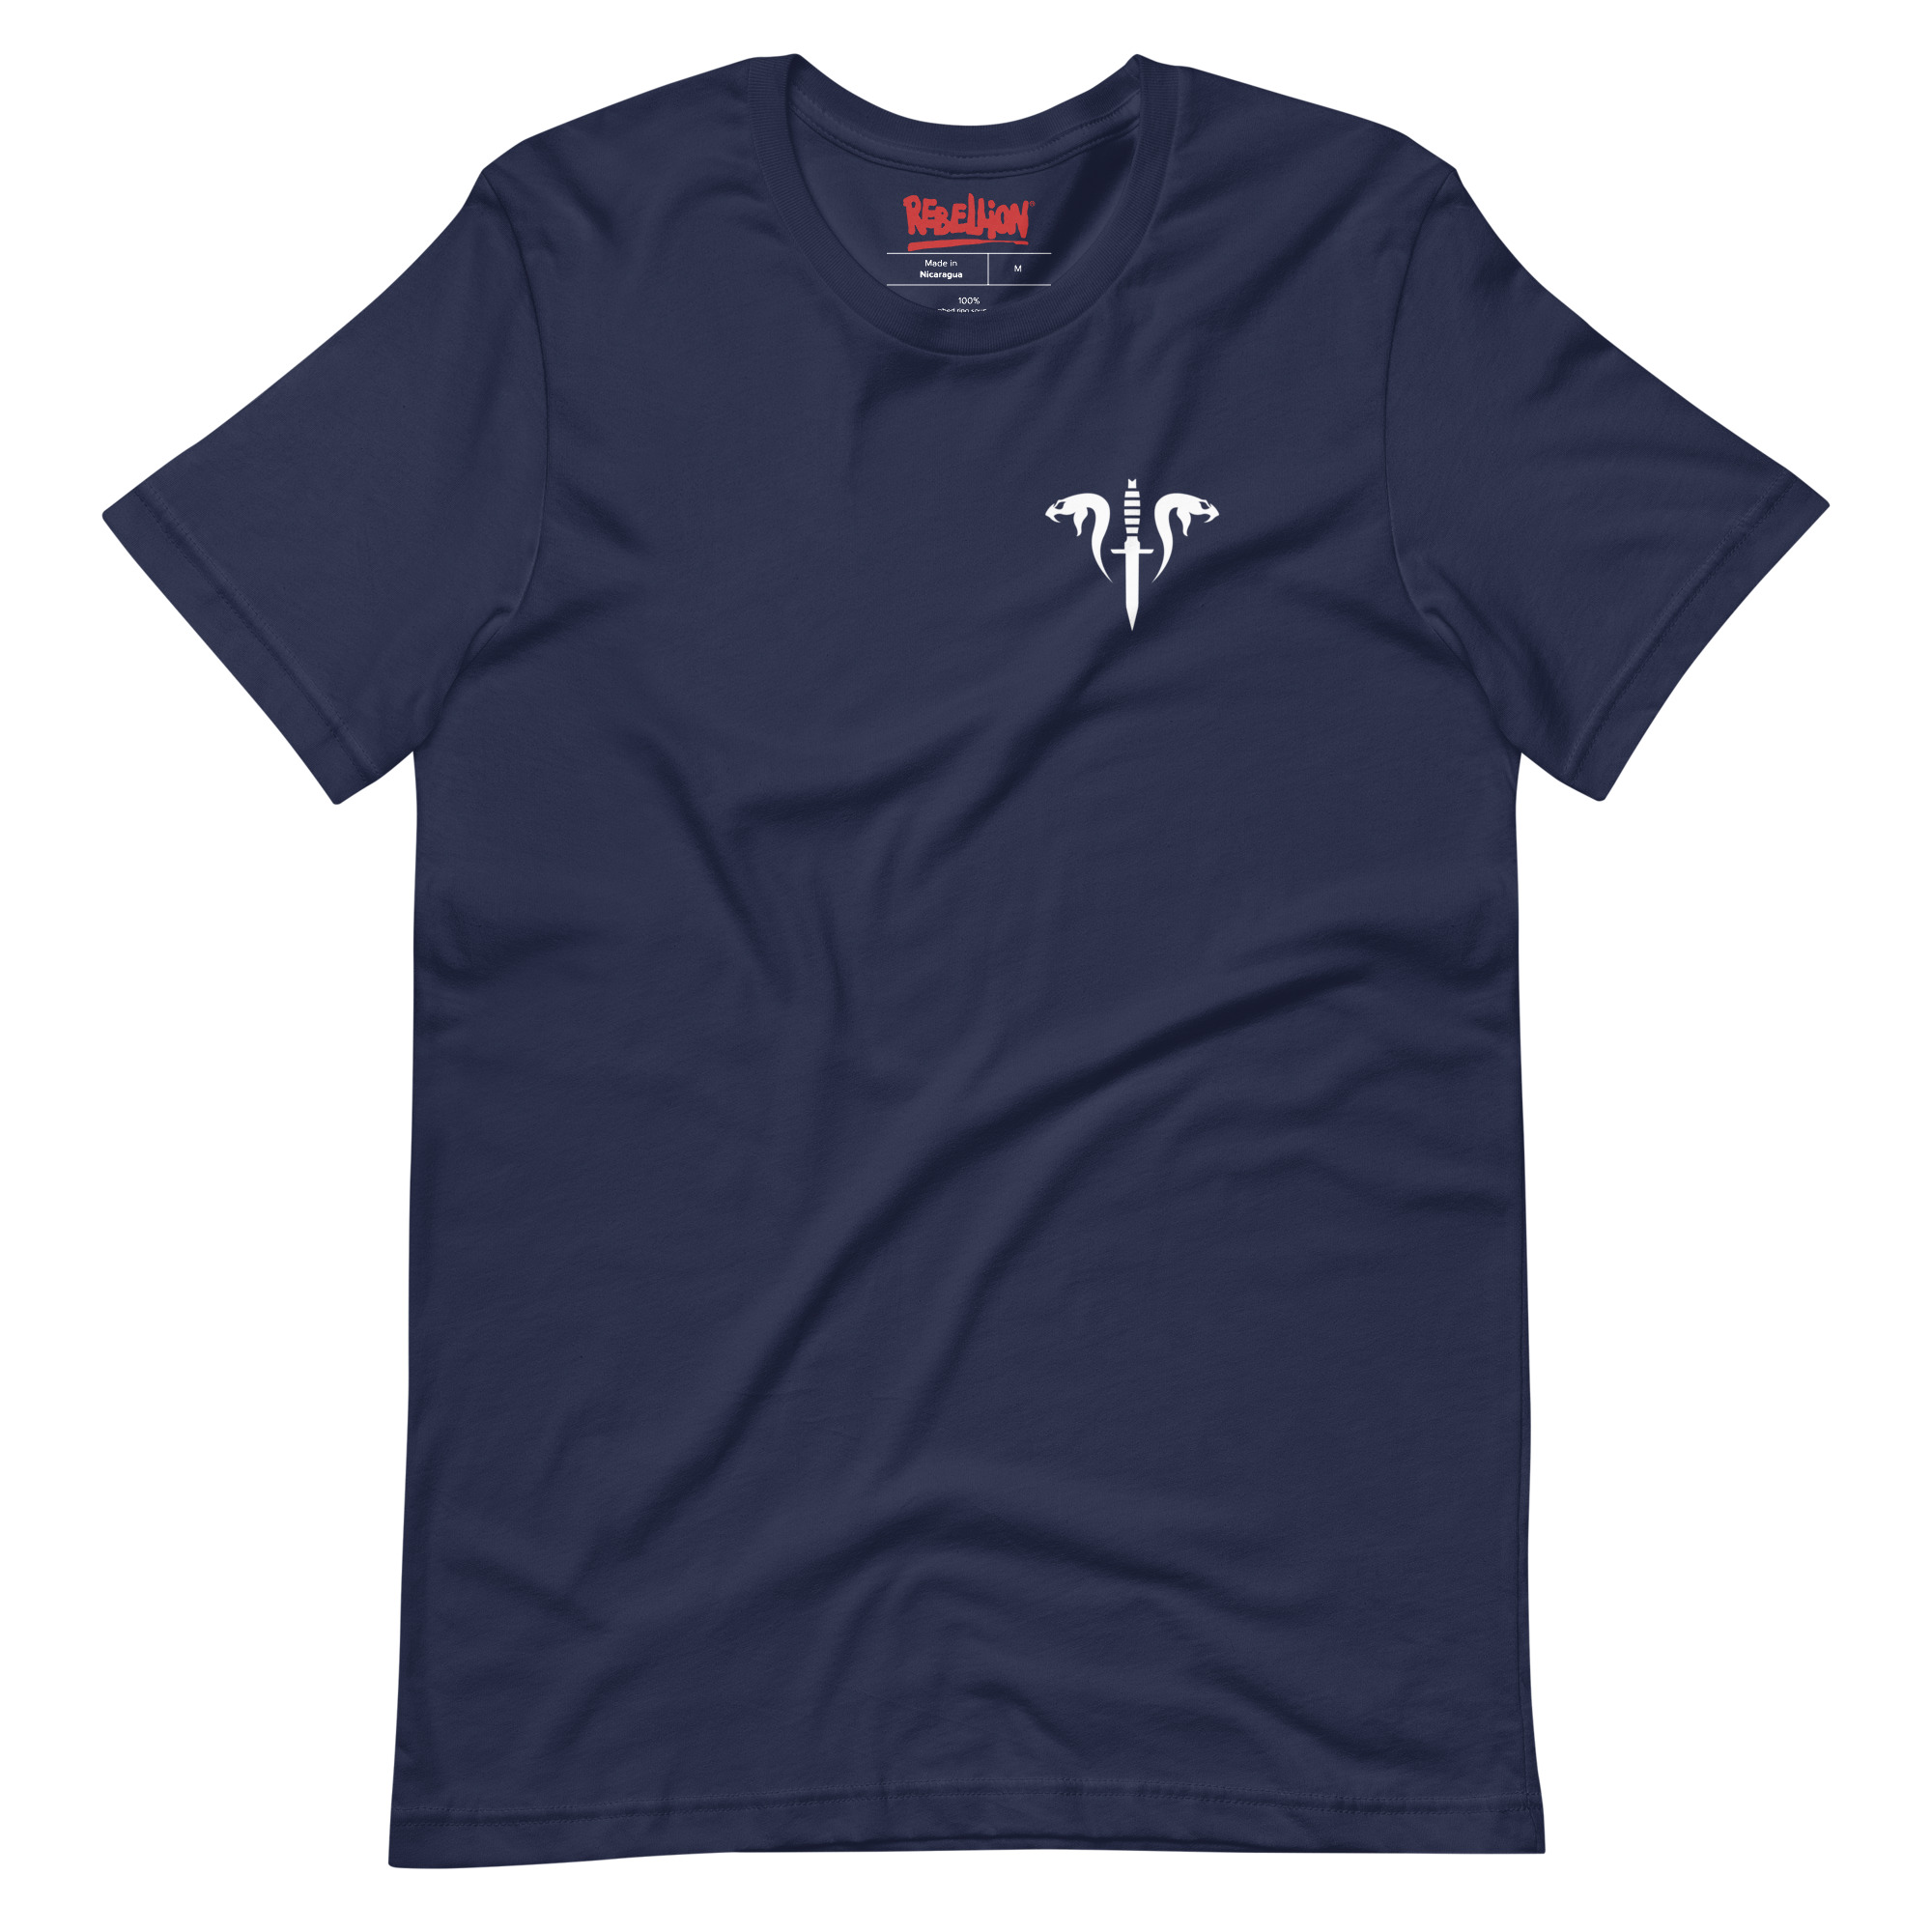 Image of a navy coloured Sniper Elite 5 t-shirt featuring a small Mercenaries emblem on the left breast pocket